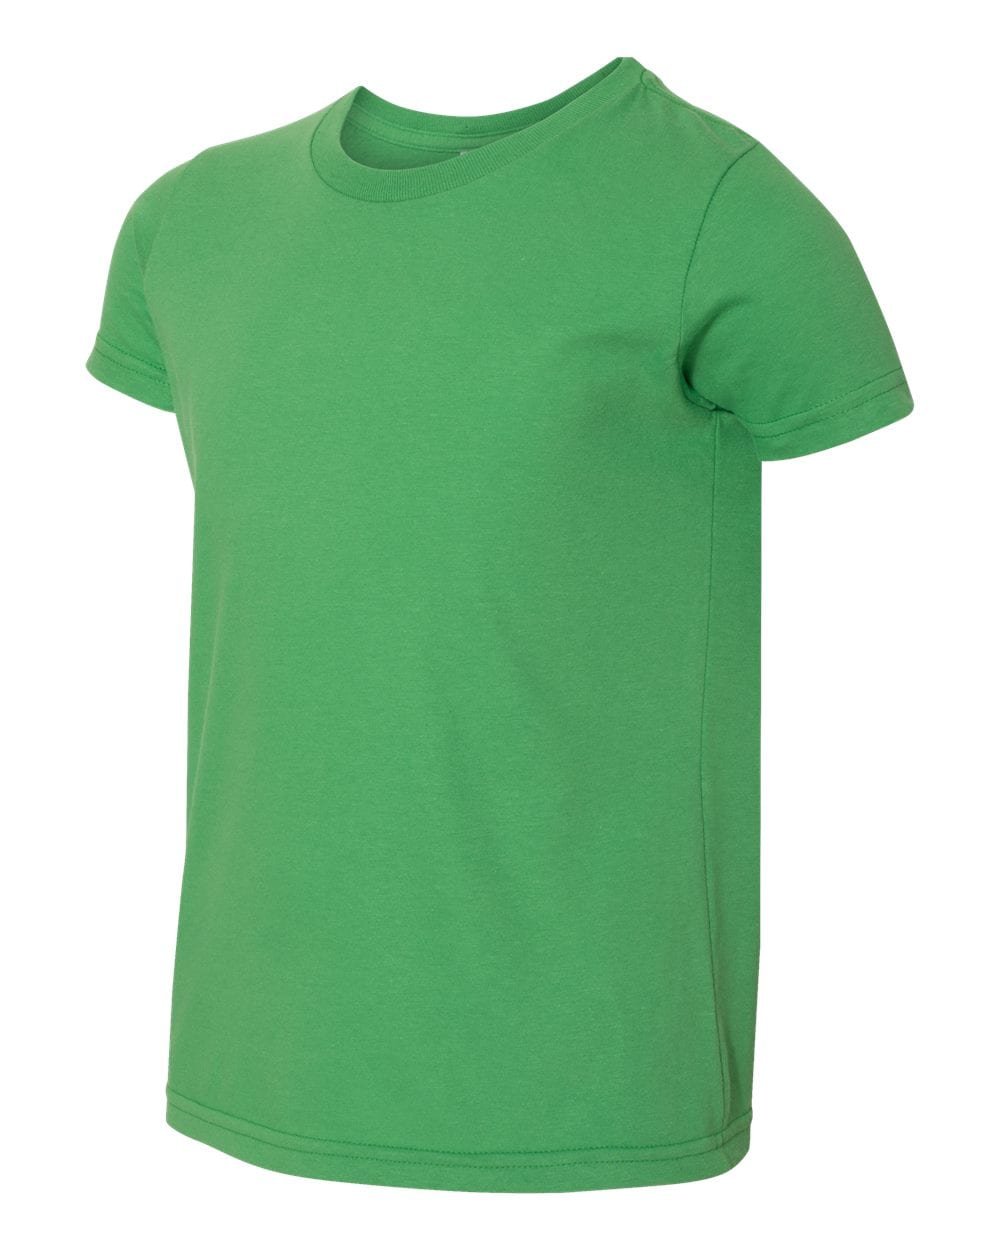 NEW American Apparel-Youth Fine Jersey Unisex Tee T-Shirt 2201W  Sizes 8,10,12 